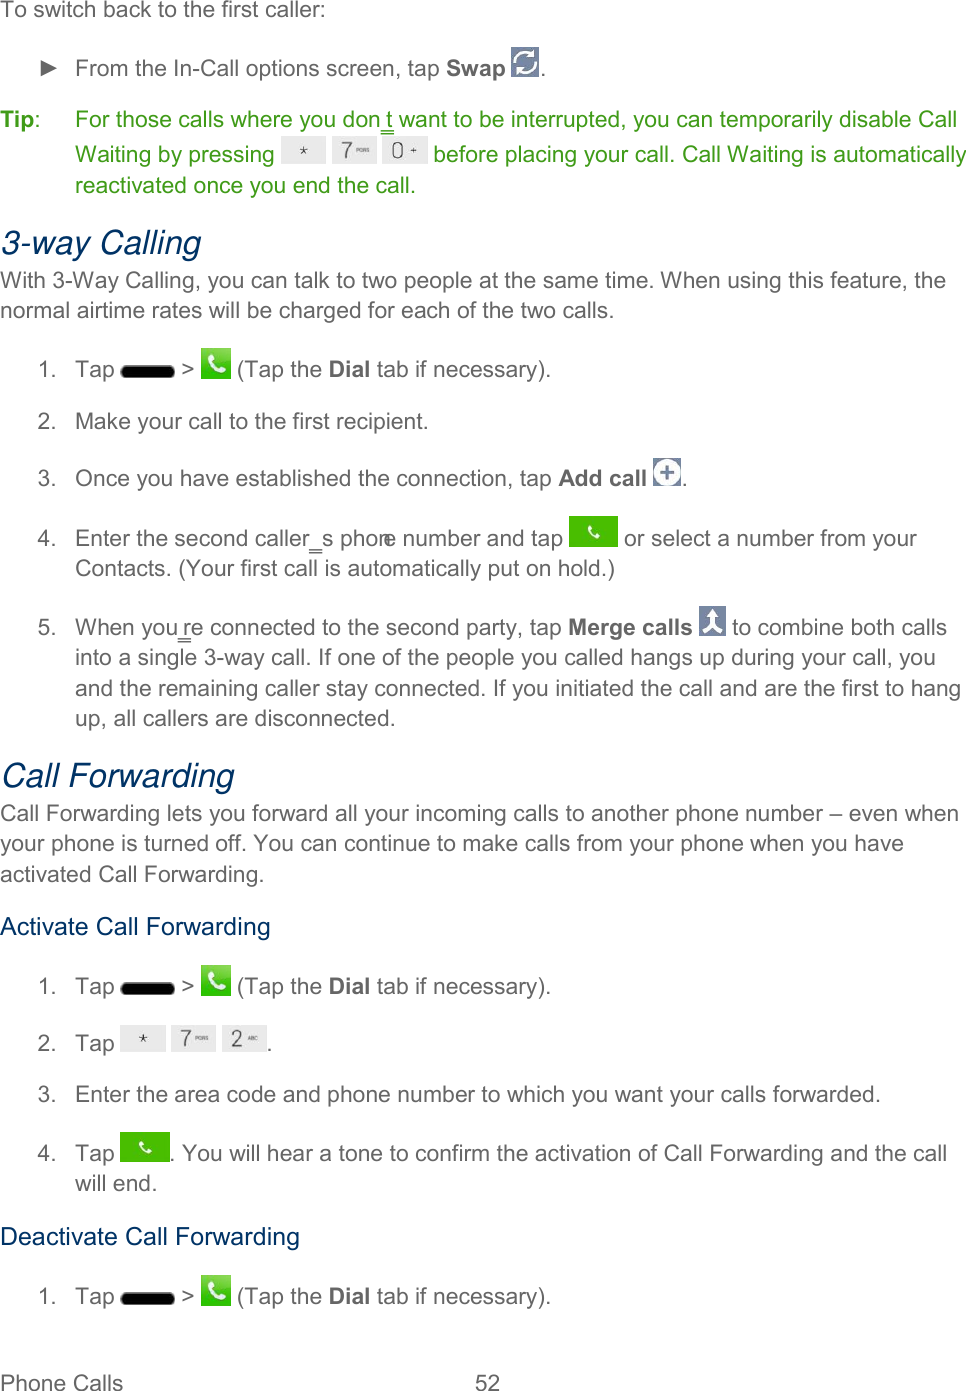  Phone Calls  52   To switch back to the first caller: ►  From the In-Call options screen, tap Swap  . Tip:   For those calls where you don‗t want to be interrupted, you can temporarily disable Call Waiting by pressing       before placing your call. Call Waiting is automatically reactivated once you end the call. 3-way Calling With 3-Way Calling, you can talk to two people at the same time. When using this feature, the normal airtime rates will be charged for each of the two calls. 1.  Tap   &gt;   (Tap the Dial tab if necessary). 2.  Make your call to the first recipient. 3.  Once you have established the connection, tap Add call  . 4.  Enter the second caller‗s phone number and tap   or select a number from your Contacts. (Your first call is automatically put on hold.) 5.  When you‗re connected to the second party, tap Merge calls   to combine both calls into a single 3-way call. If one of the people you called hangs up during your call, you and the remaining caller stay connected. If you initiated the call and are the first to hang up, all callers are disconnected. Call Forwarding Call Forwarding lets you forward all your incoming calls to another phone number – even when your phone is turned off. You can continue to make calls from your phone when you have activated Call Forwarding. Activate Call Forwarding 1.  Tap   &gt;   (Tap the Dial tab if necessary). 2.  Tap      . 3.  Enter the area code and phone number to which you want your calls forwarded. 4.  Tap  . You will hear a tone to confirm the activation of Call Forwarding and the call will end. Deactivate Call Forwarding 1.  Tap   &gt;   (Tap the Dial tab if necessary). 